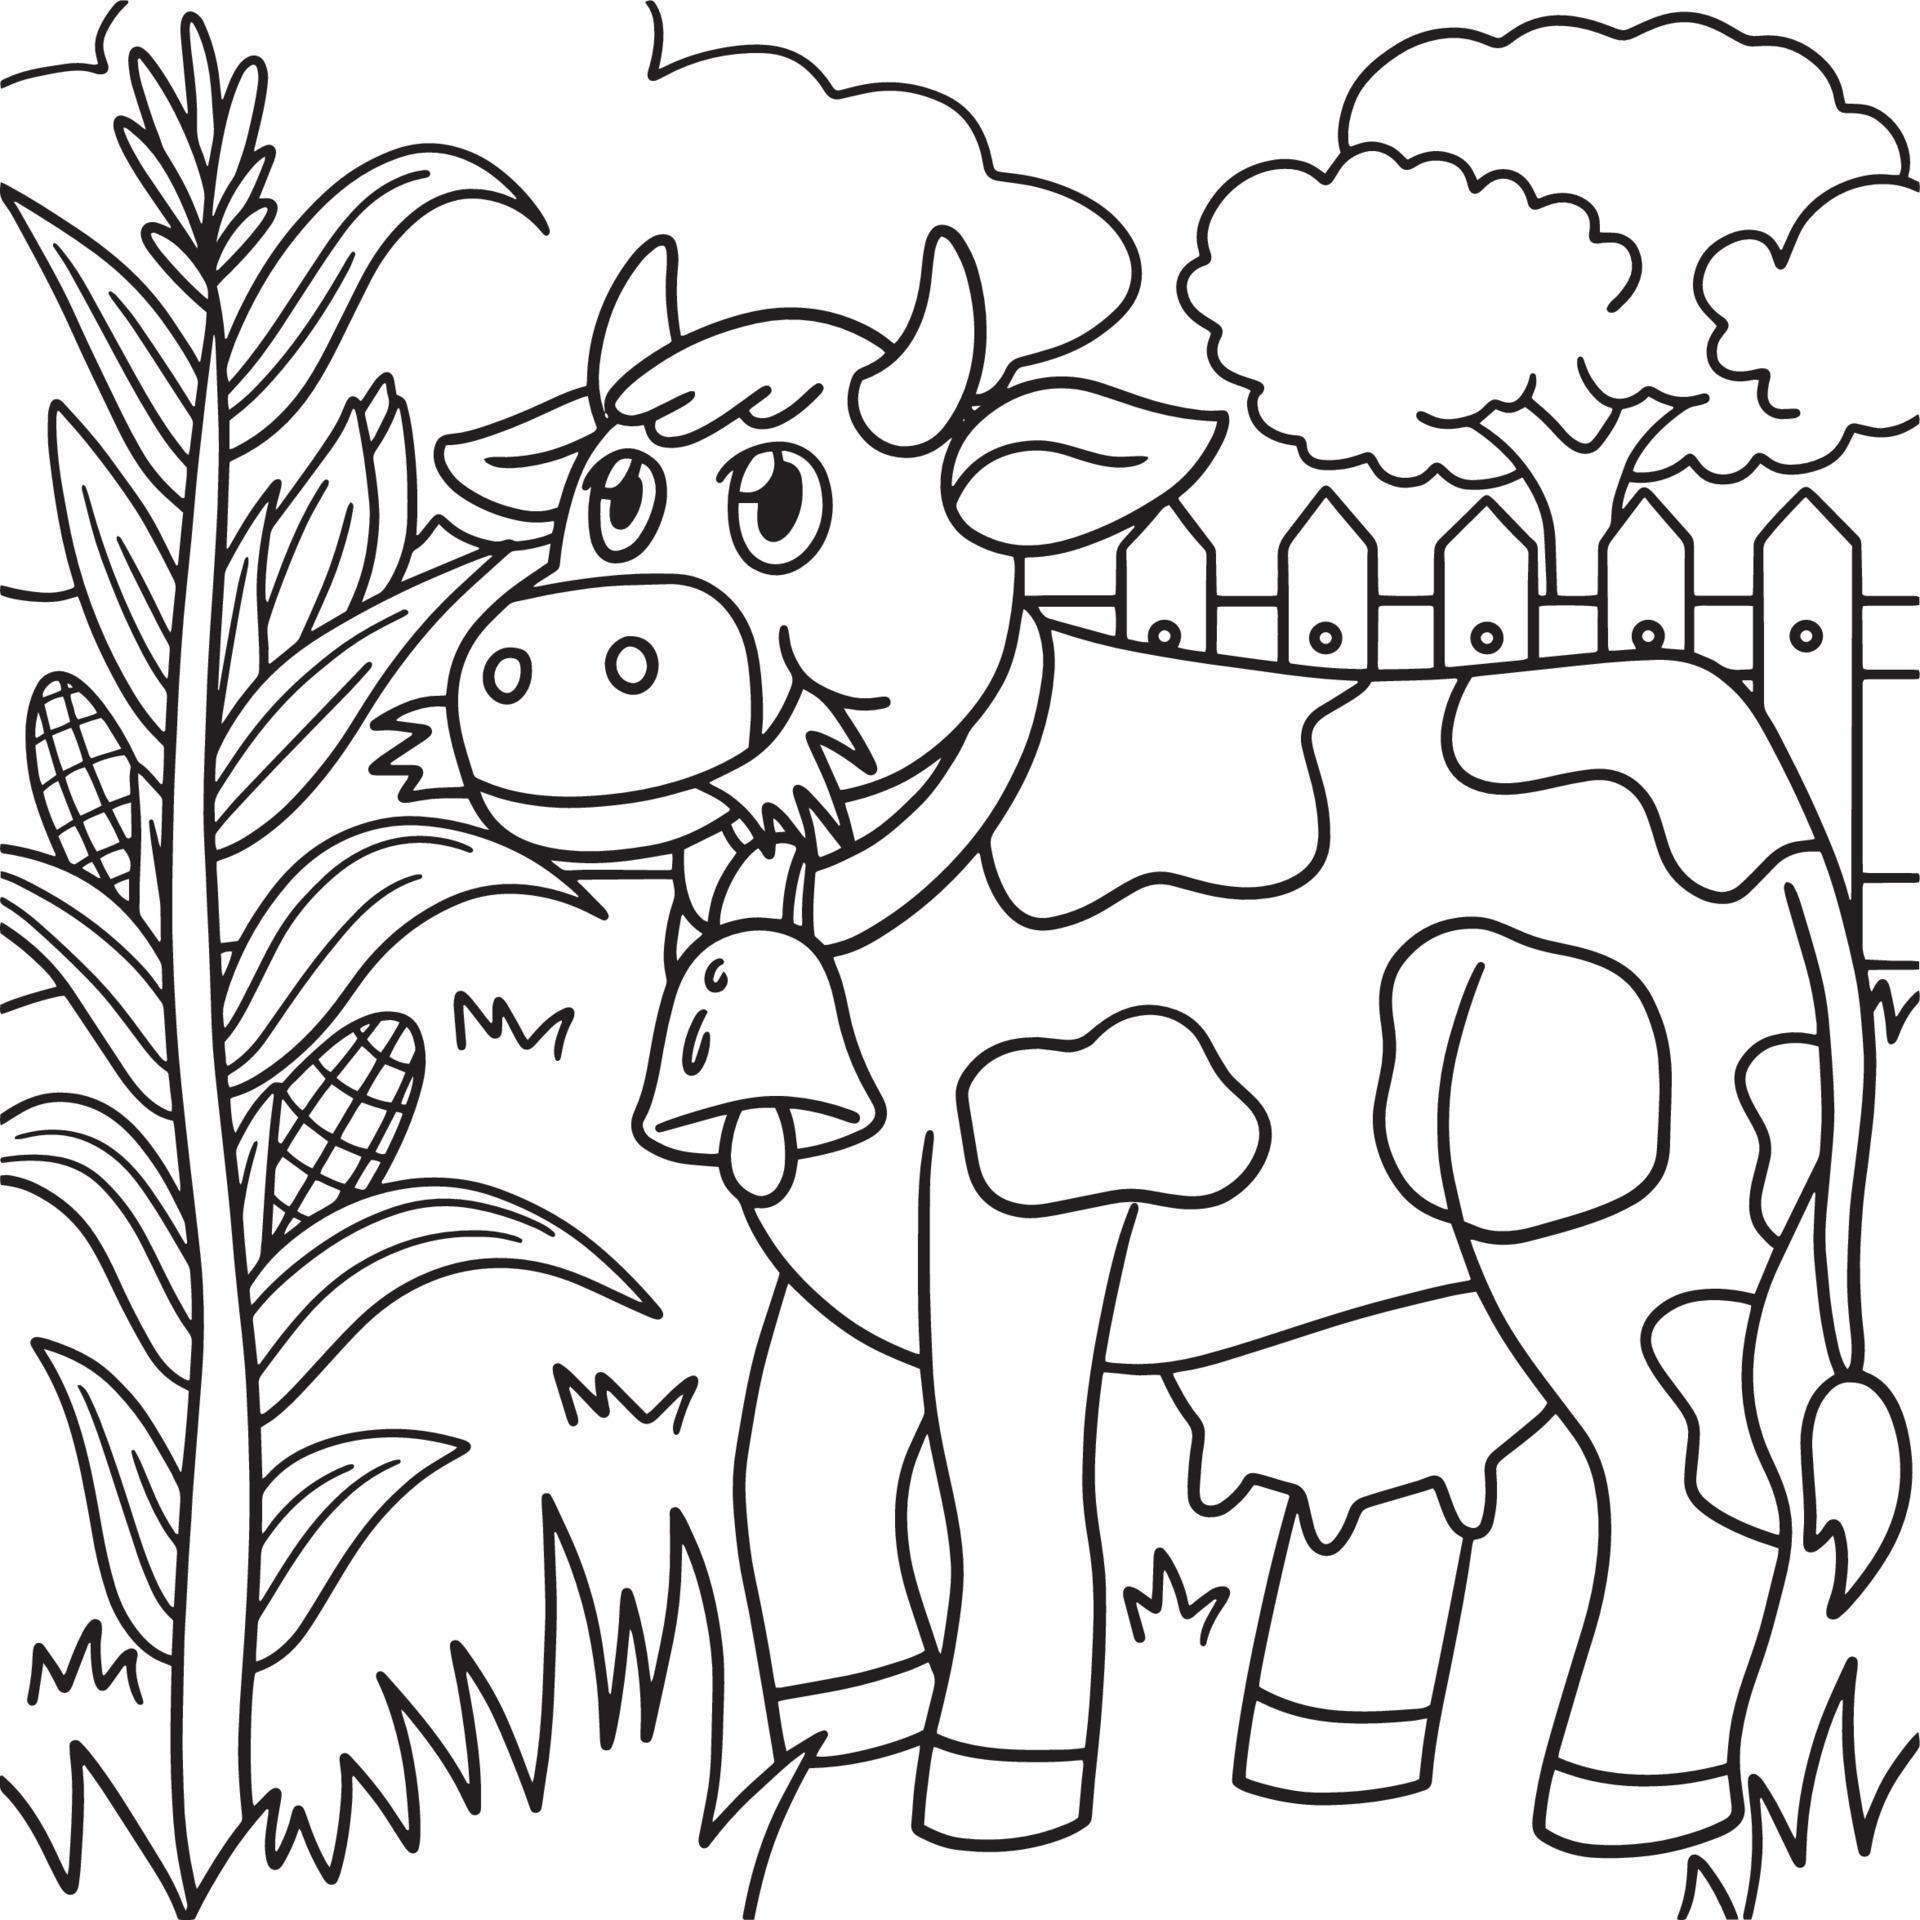 Coloring page dazzling cow for children 5-6 years old